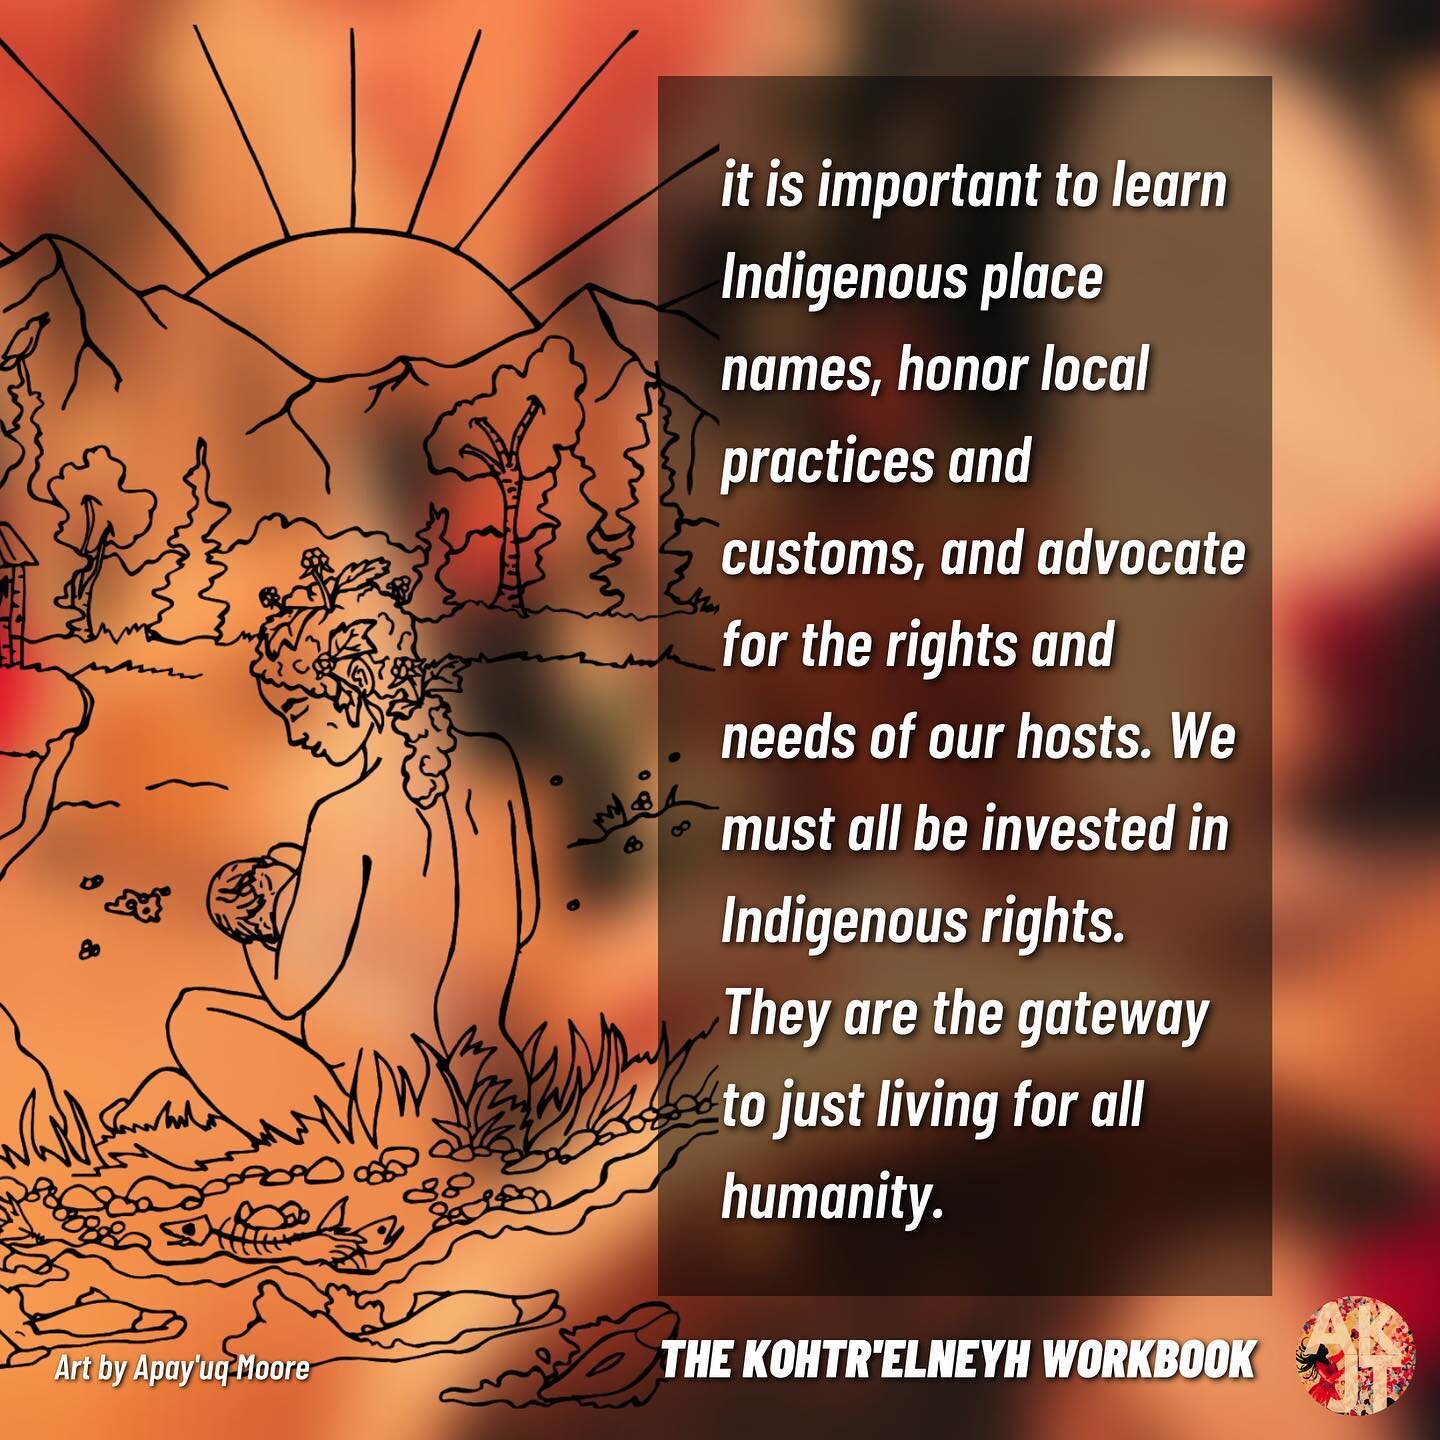 ✨Indigenous wisdom shows us the path forward. ✨

It is important to learn Indigenous place names, honor local practices and customs, and advocate for the rights and needs of our hosts. We must all be invested in Indigenous rights. They are the gatewa